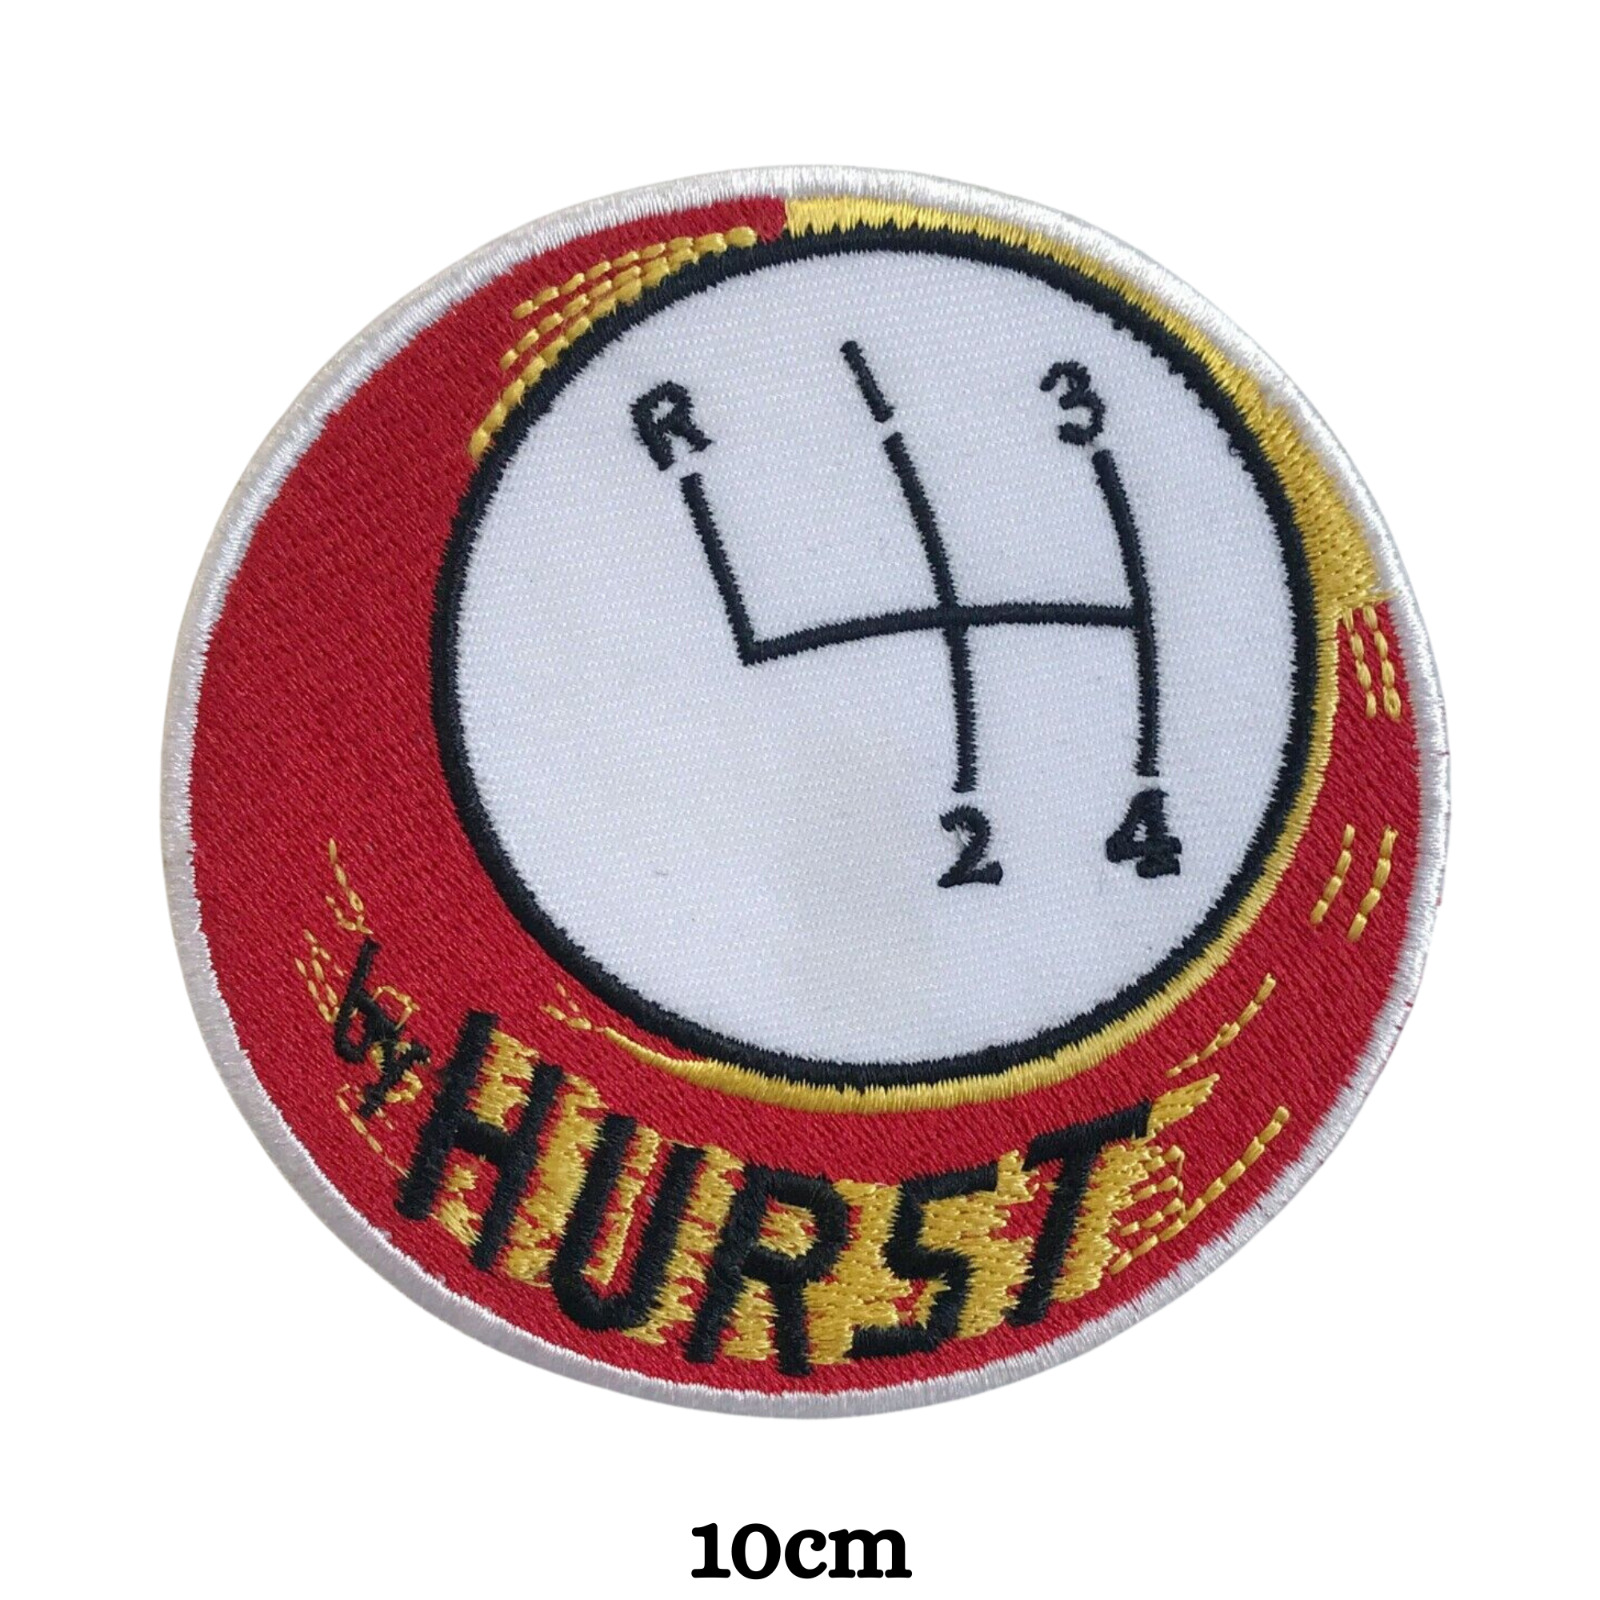 By Hurst Gear box round logo Iron Sew on Embroidered Patch